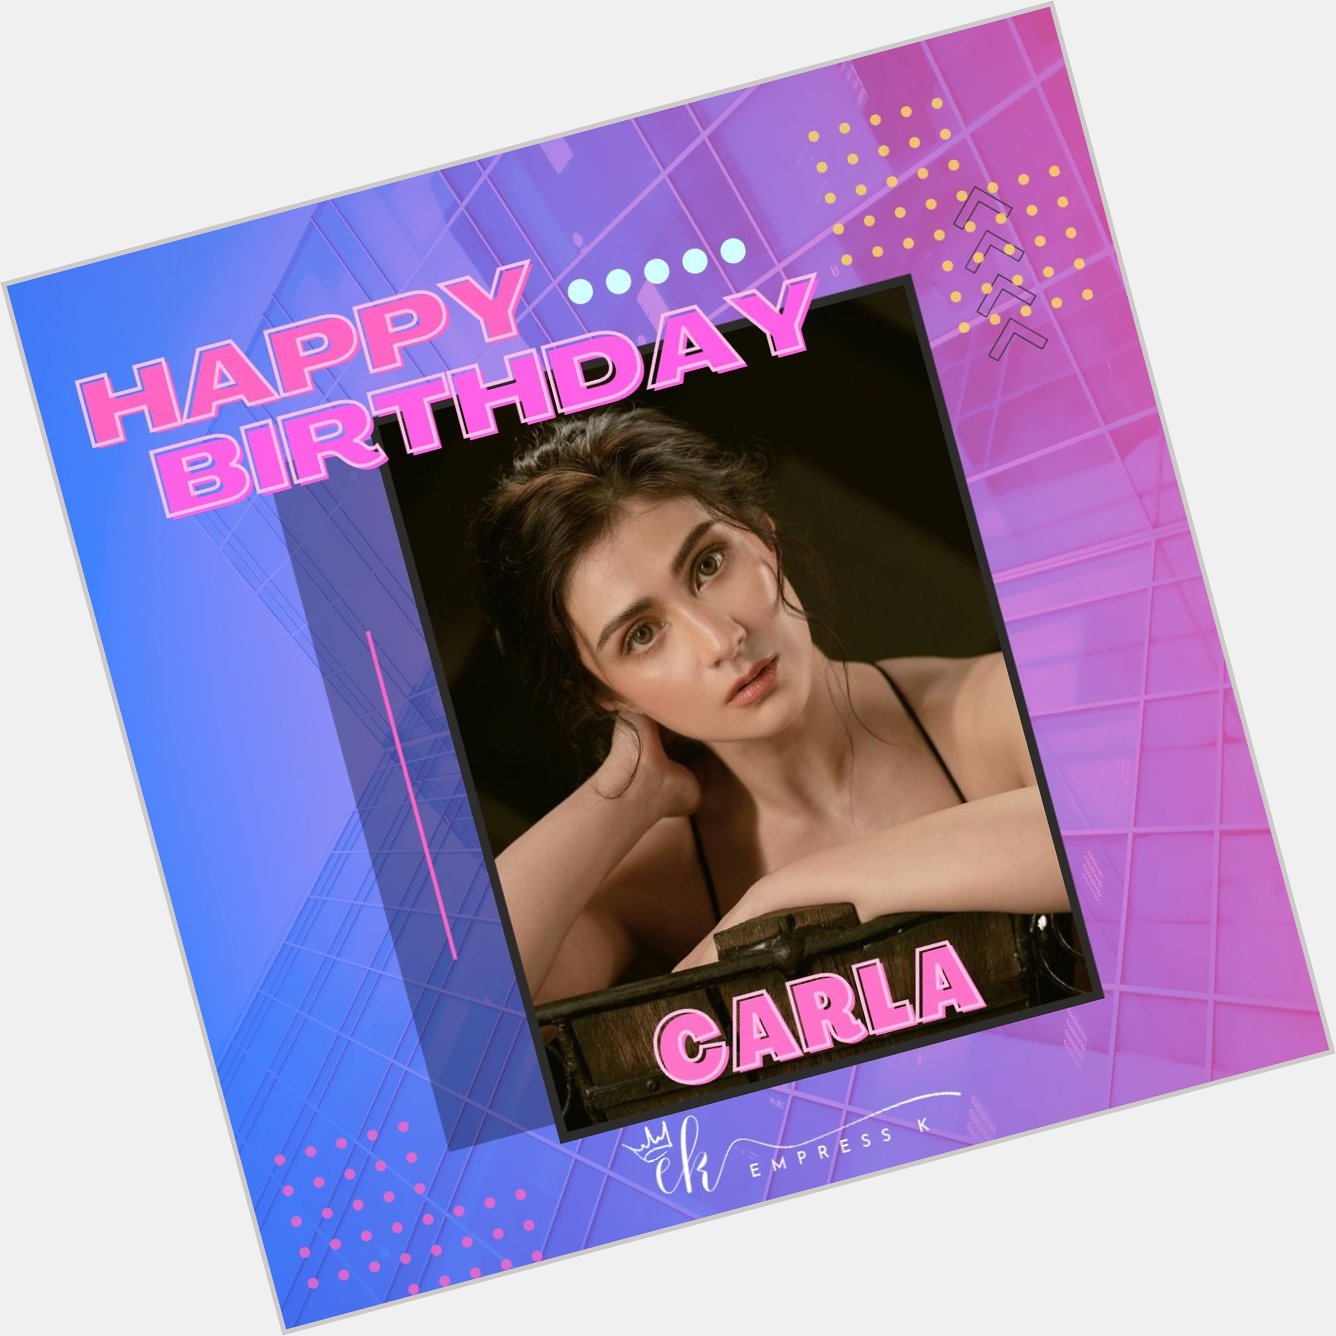 Happy birthday, Carla Abellana! I hope you have a wonderful day and year to come. 